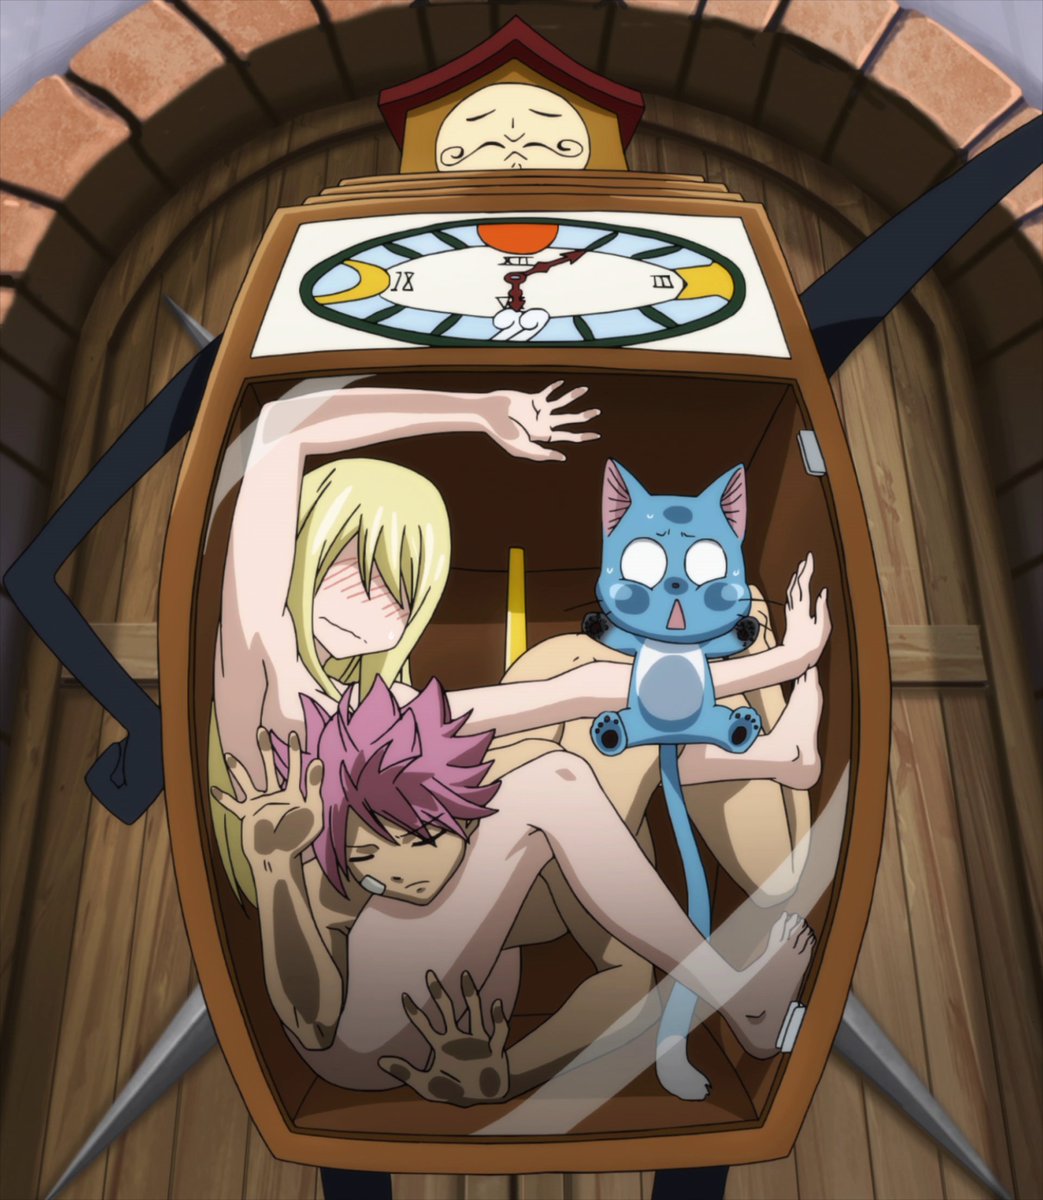 Fanservice #AnimeFanservice #FairyTail #FT フ ェ ア リ-テ イ ル What is your favor...